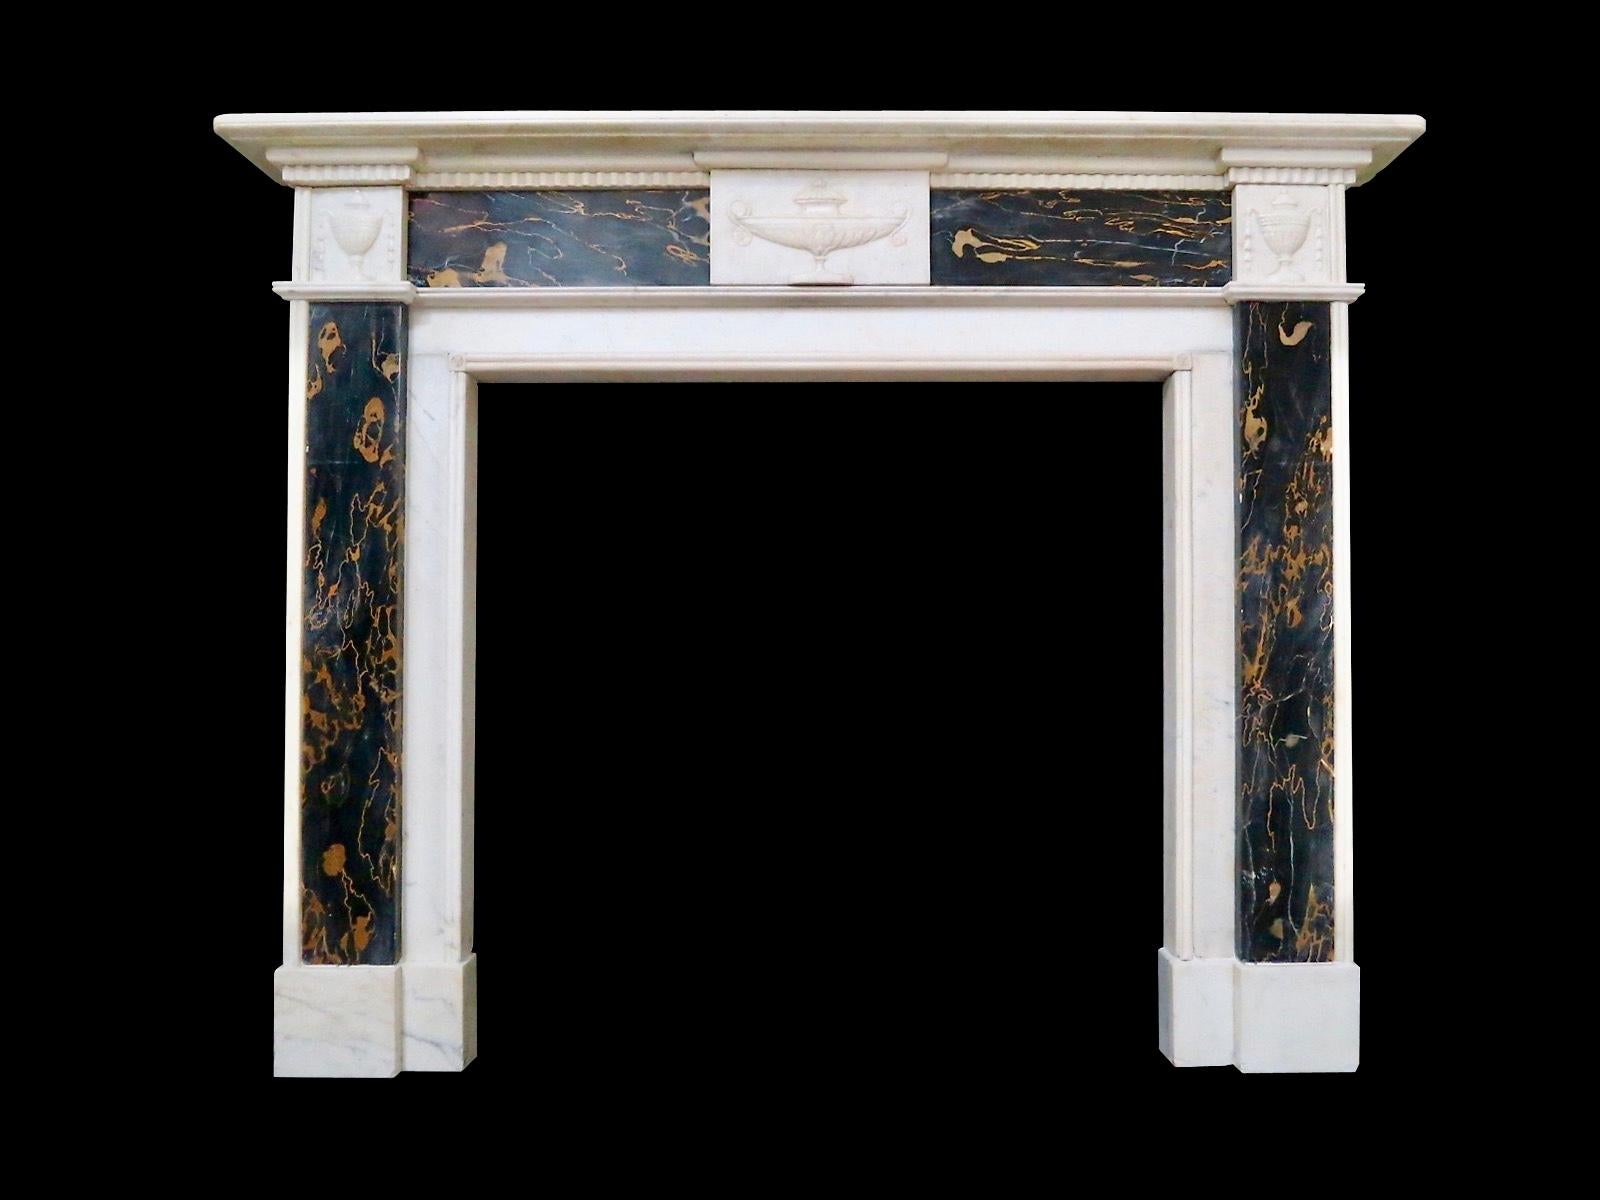 A late Regency fireplace in statuary white and rare black and gold Italian Portoro marble. The jambs with Portoro panels and corner blocks of carved classical urns with bell drops. The centre tablet again of carved classical urn flanked on either